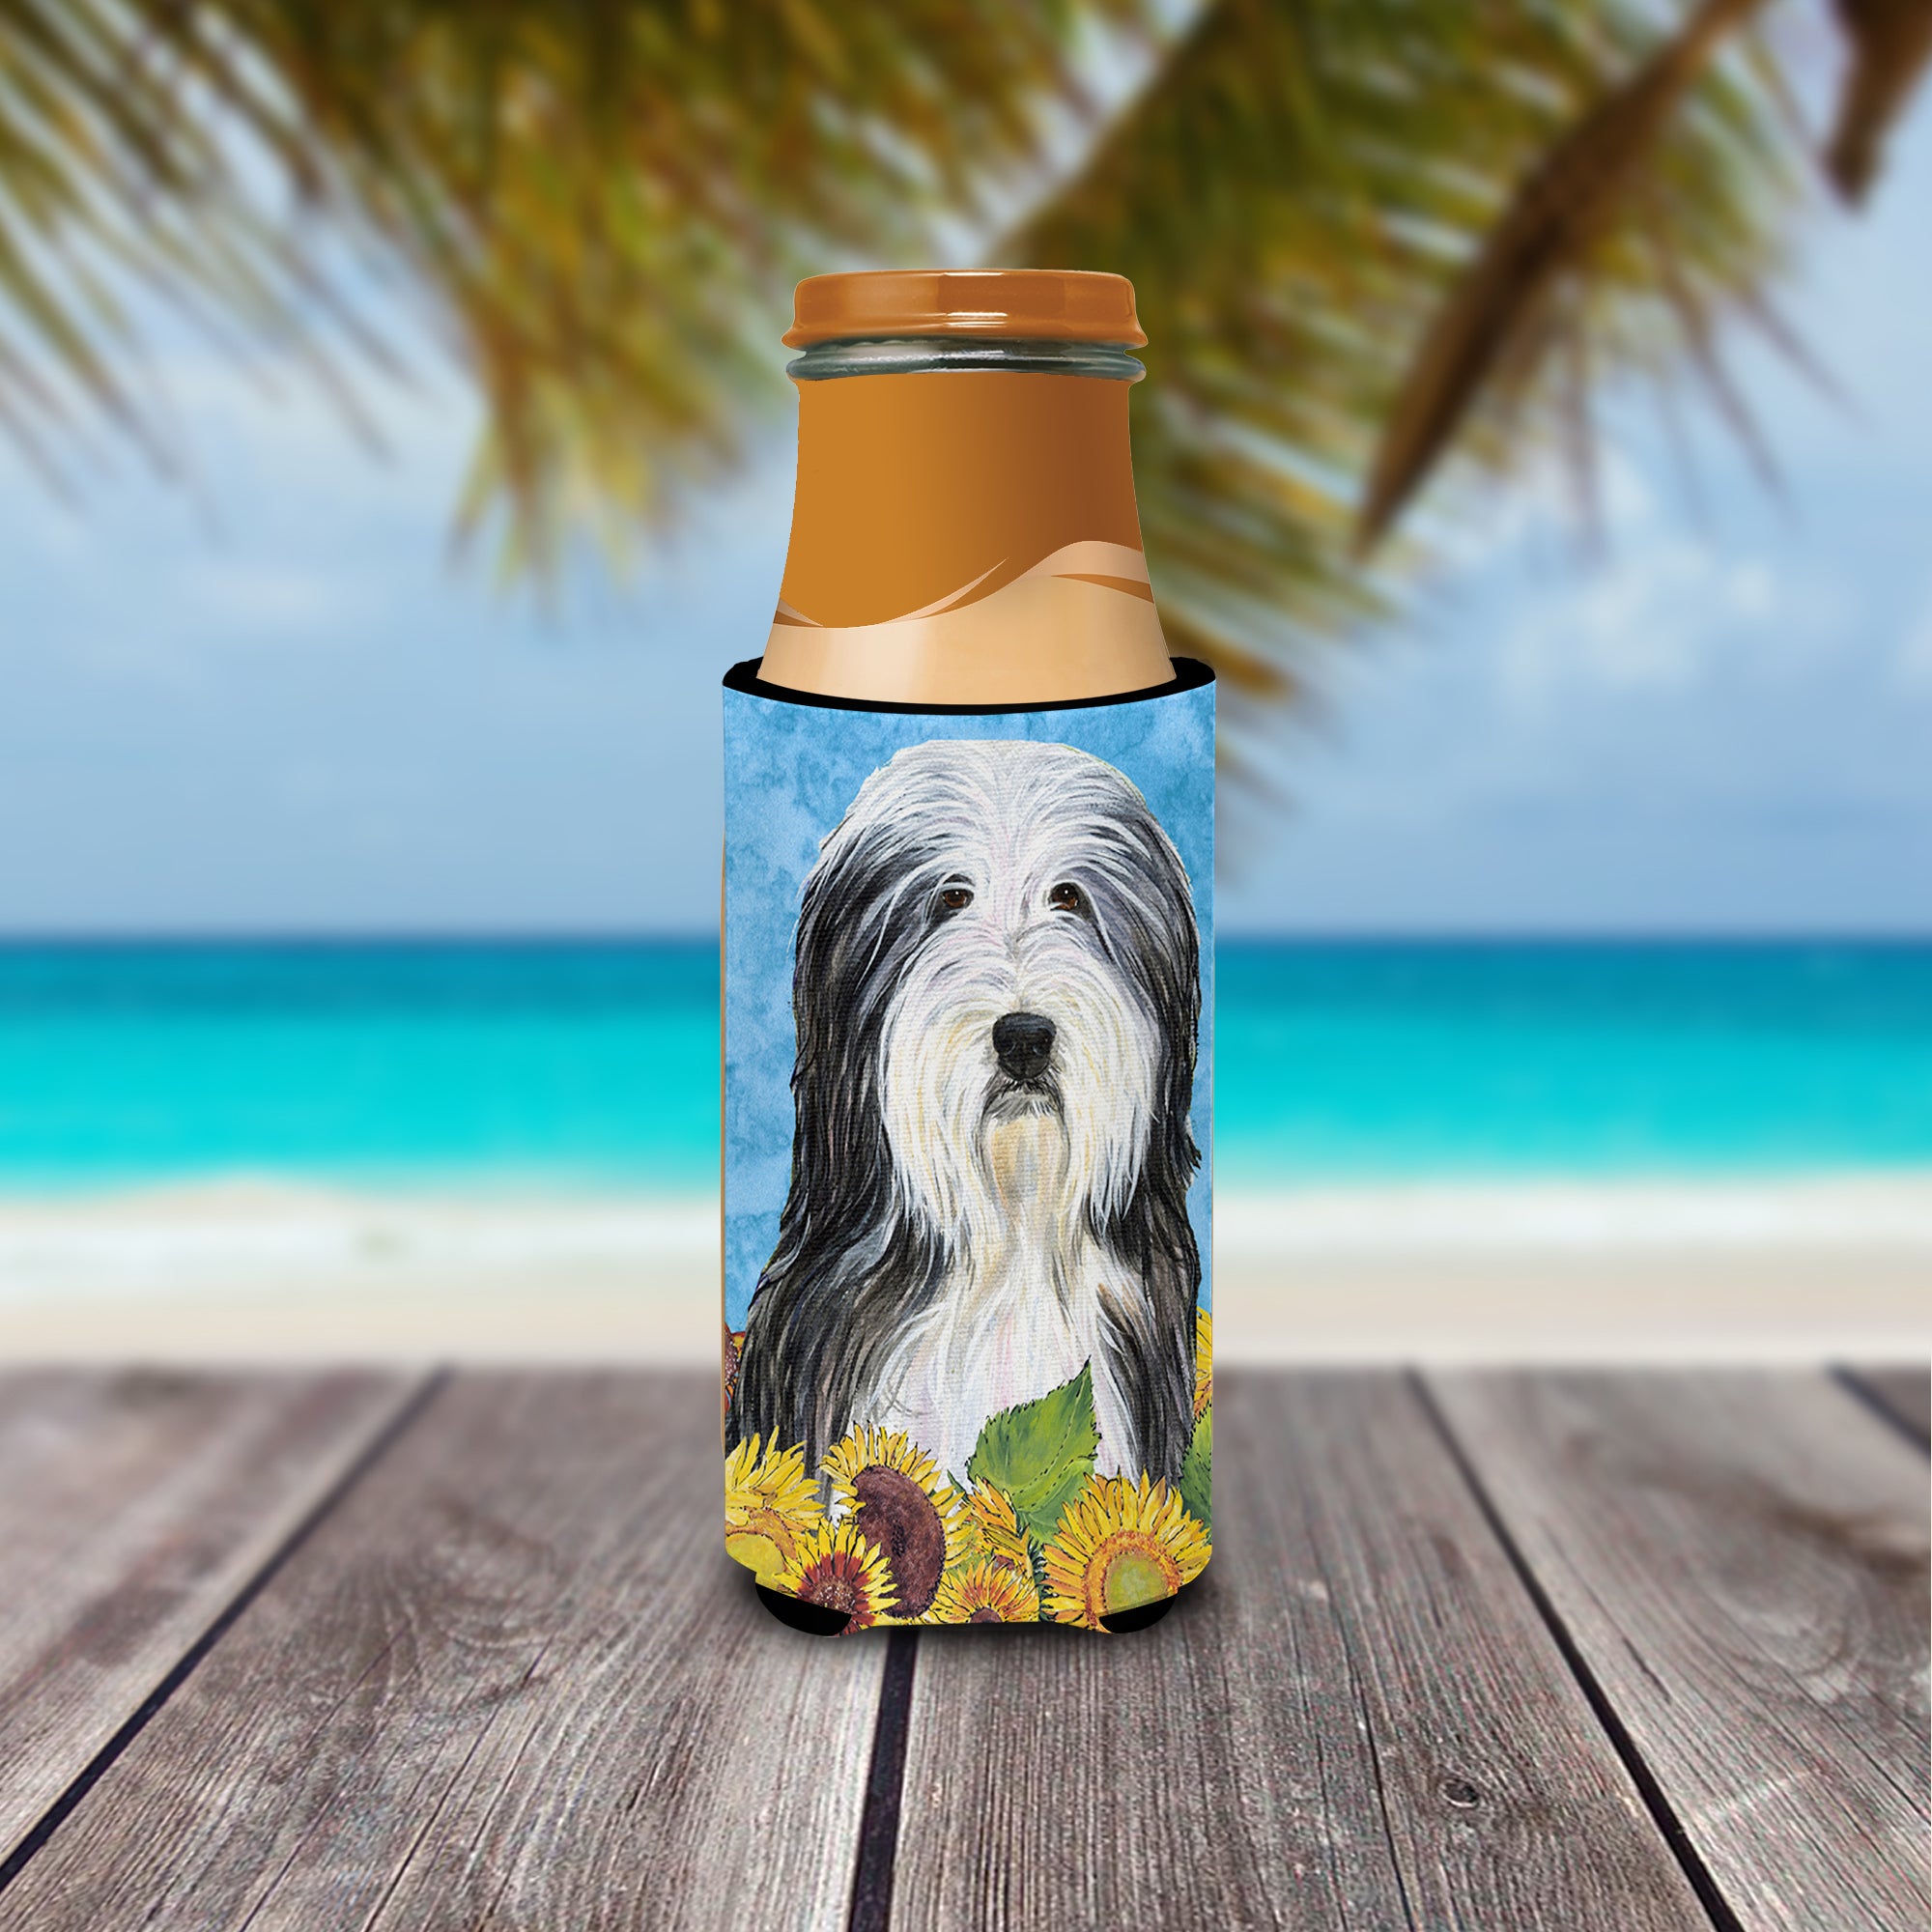 Bearded Collie in Summer Flowers Ultra Beverage Isolateurs pour canettes minces SS4130MUK